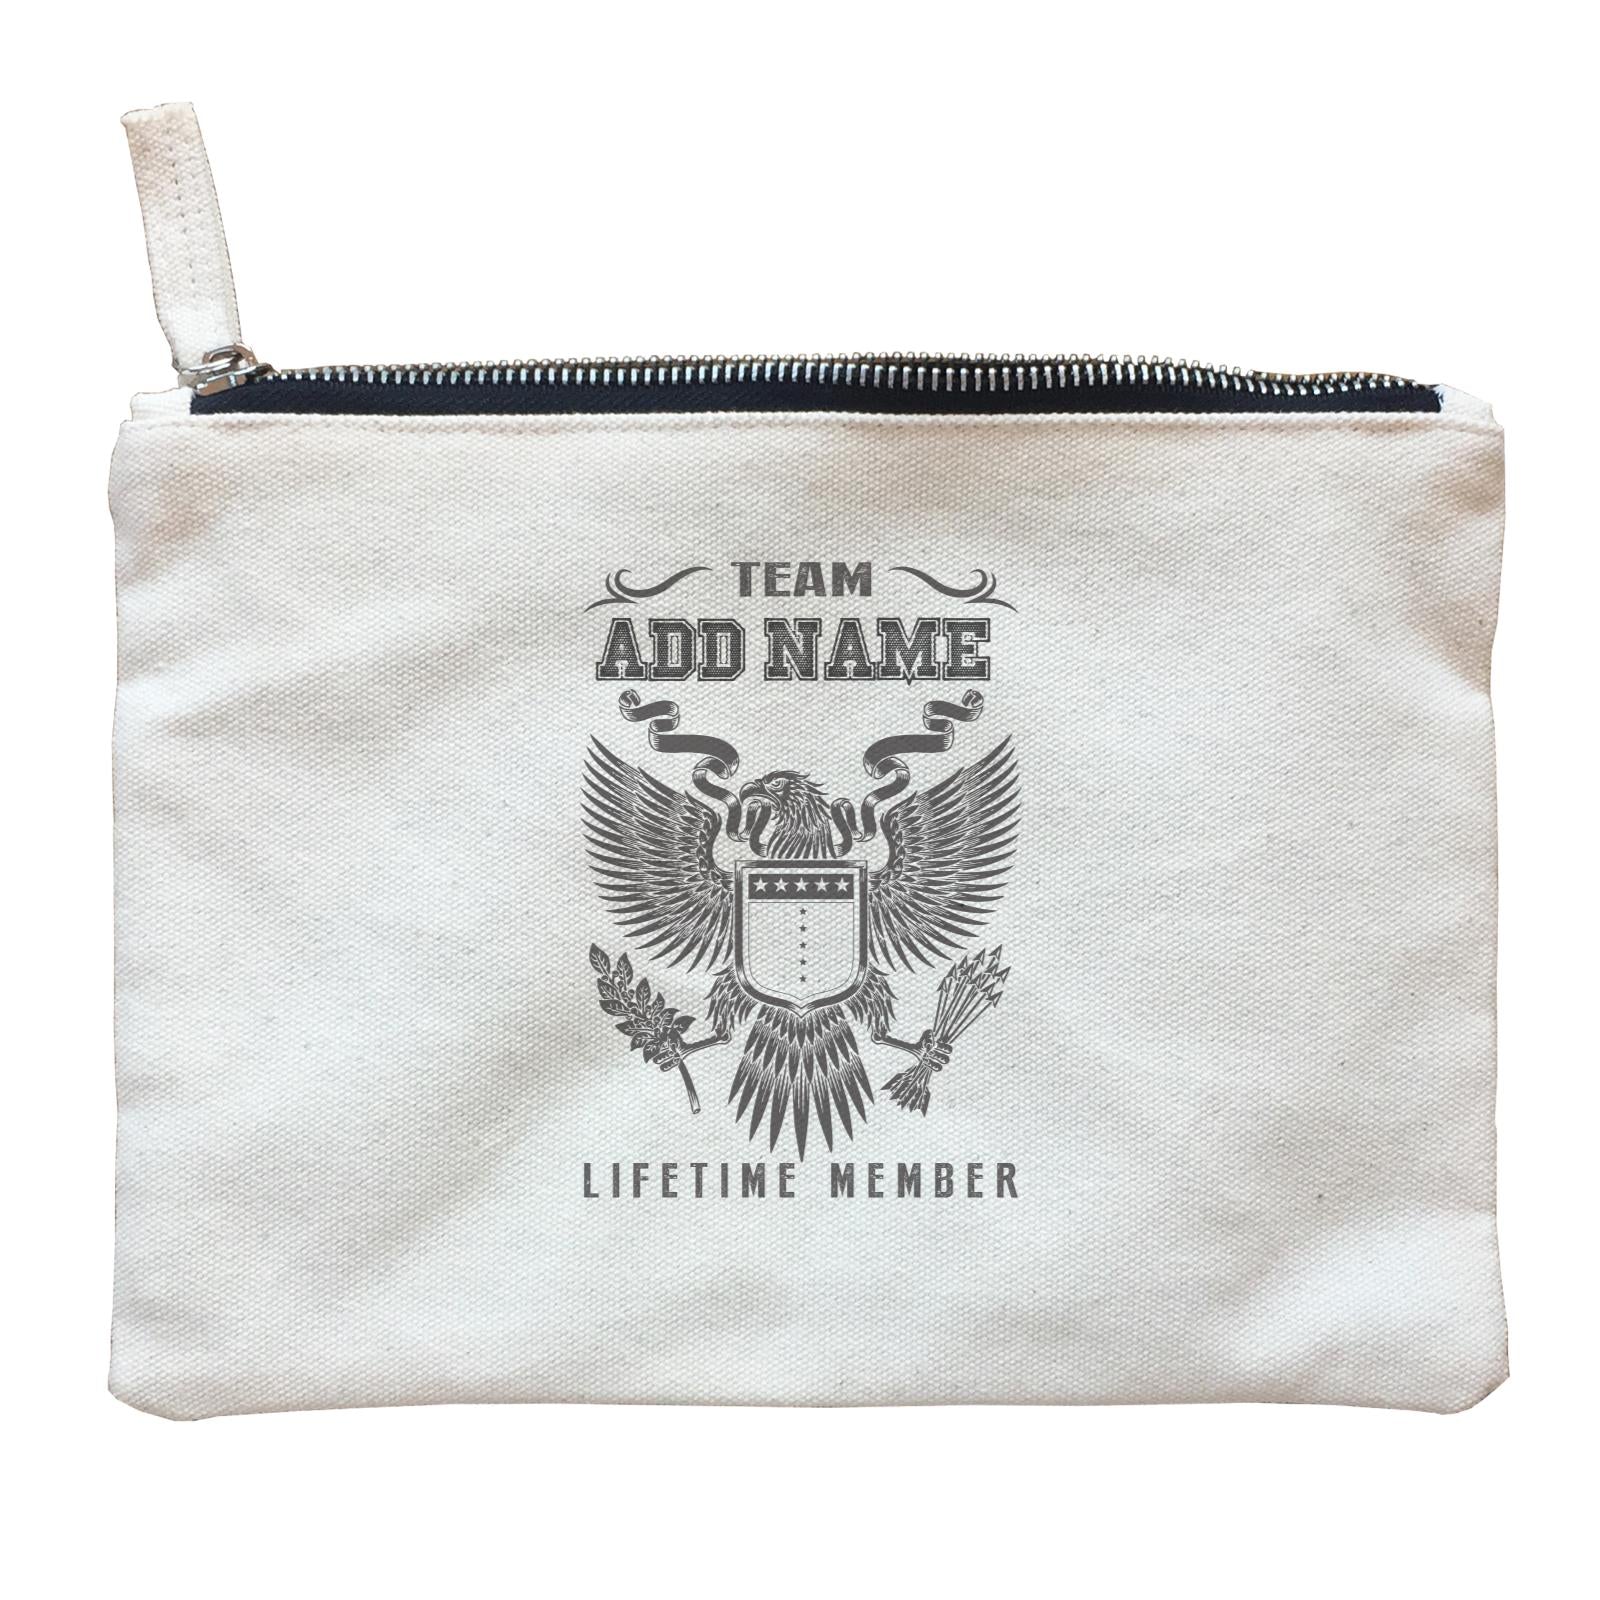 Personalize It Awesome Lifetime Member with Team Addname Zipper Pouch